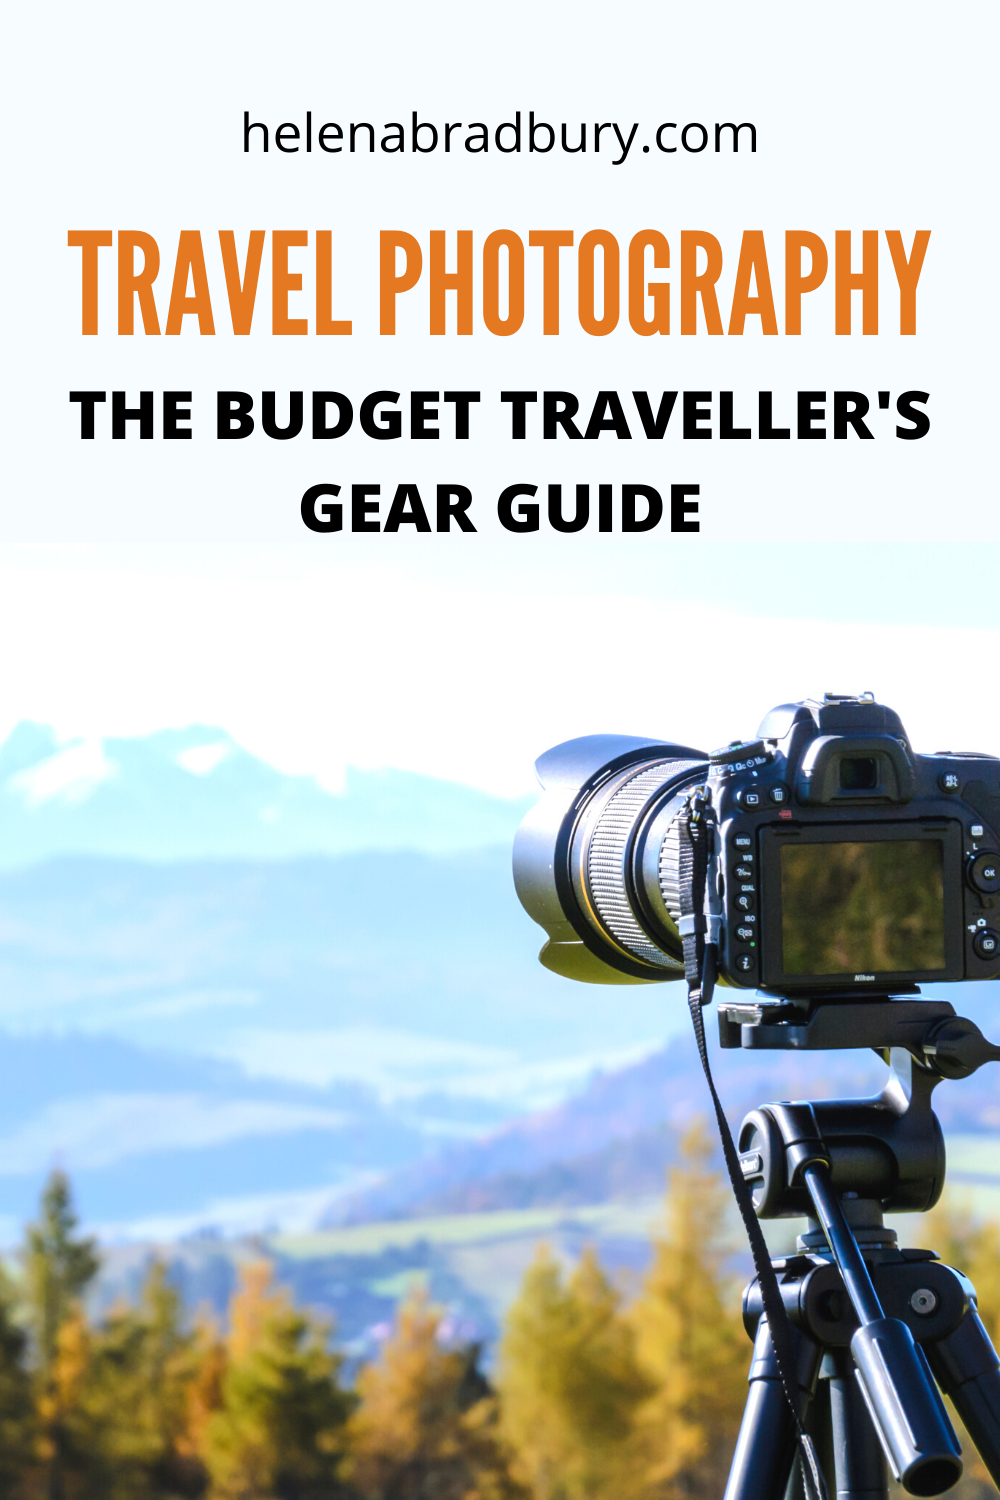 Travel photography gear list: what’s in my camera bag